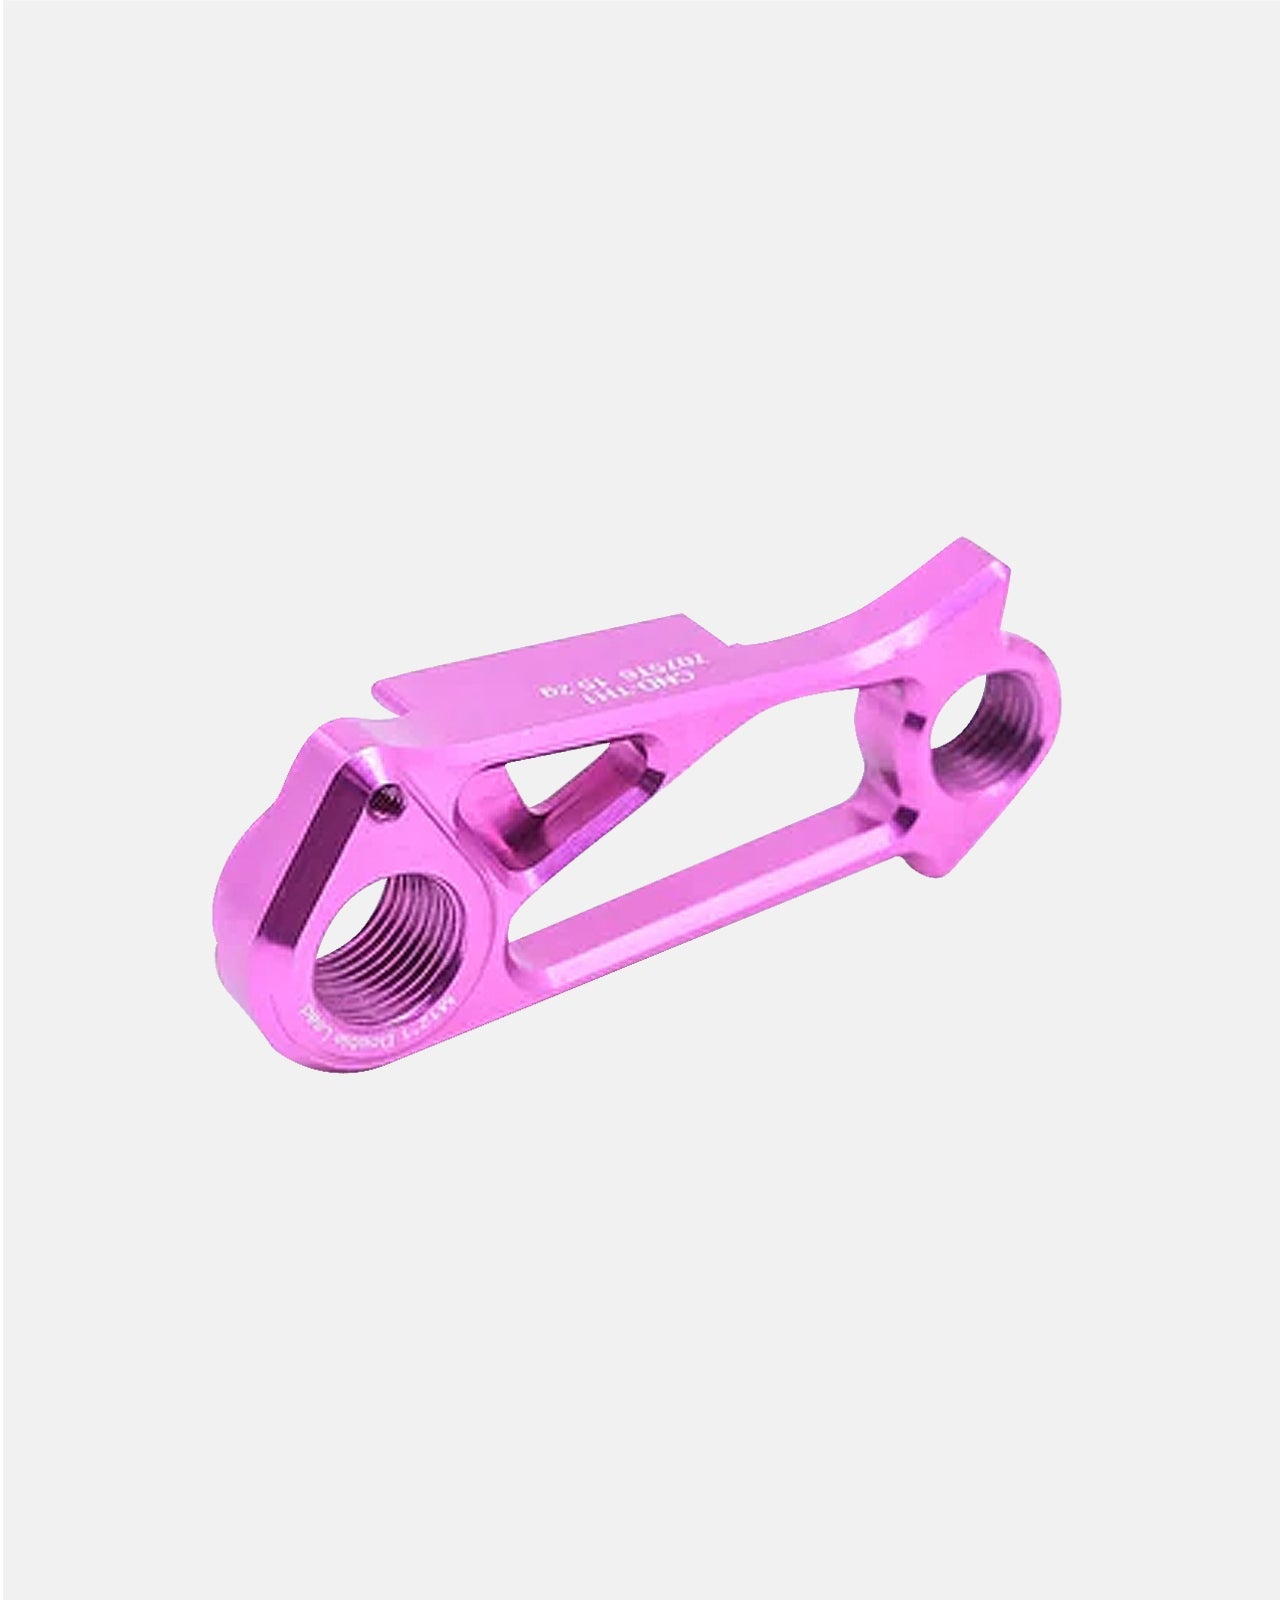 Sigeyi Cannondale Direct-Mount Disc Derailleur Hanger - Pink